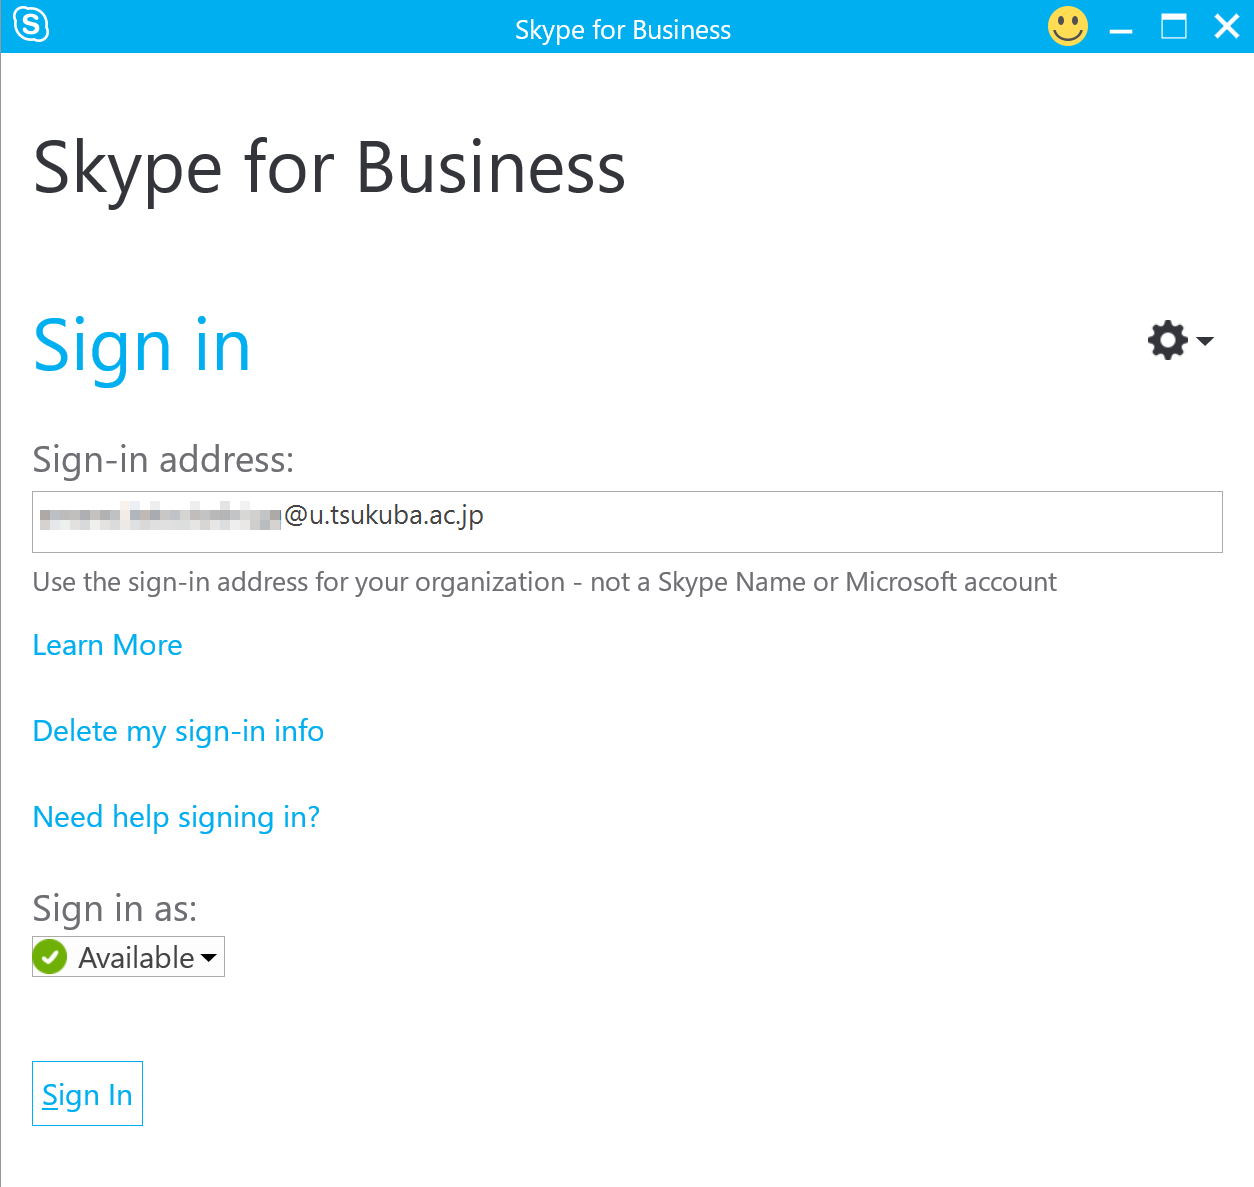 Skype for Business - Sign In